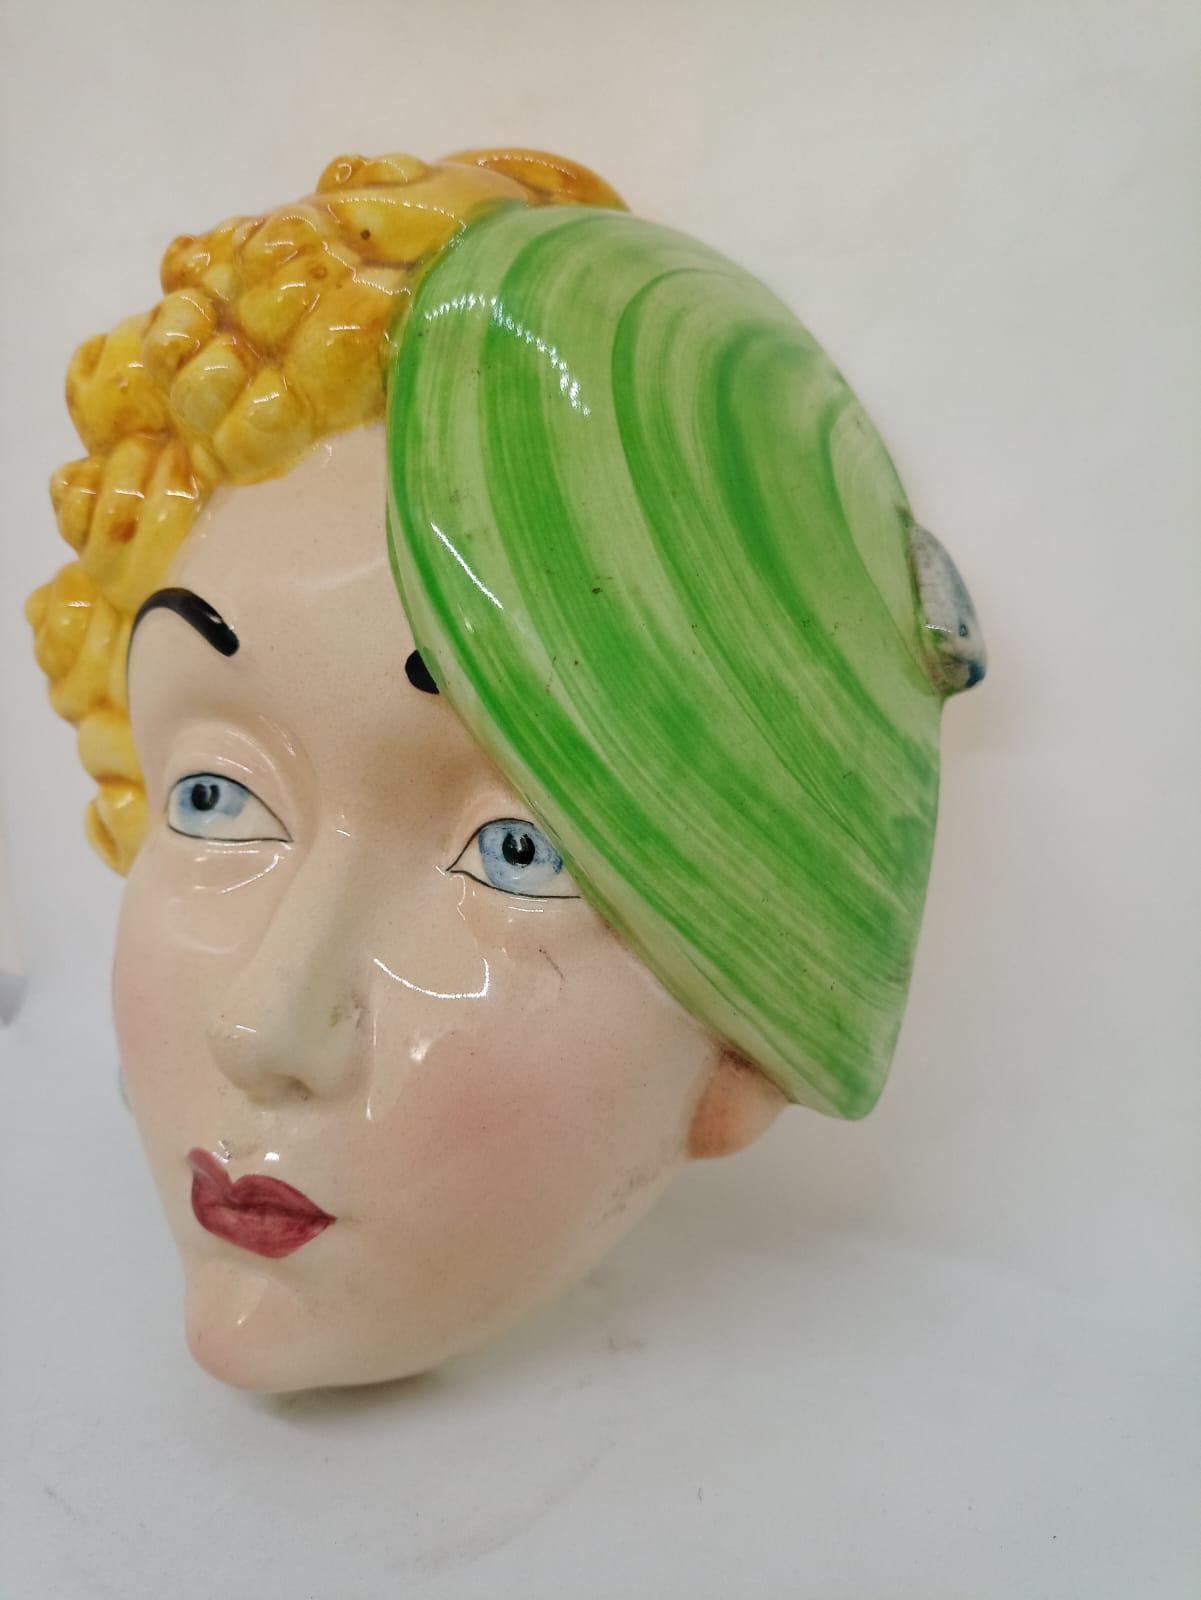 Art deco wall mask Beswick Marlene Dietrich
It has the stamps and markings on the back.
Perfect condition without restorations
Origin England Circa 1930
art deco style
Marie Magdalene Dietrich (Berlin, December 27, 1901 - Paris, May 6, 1992),